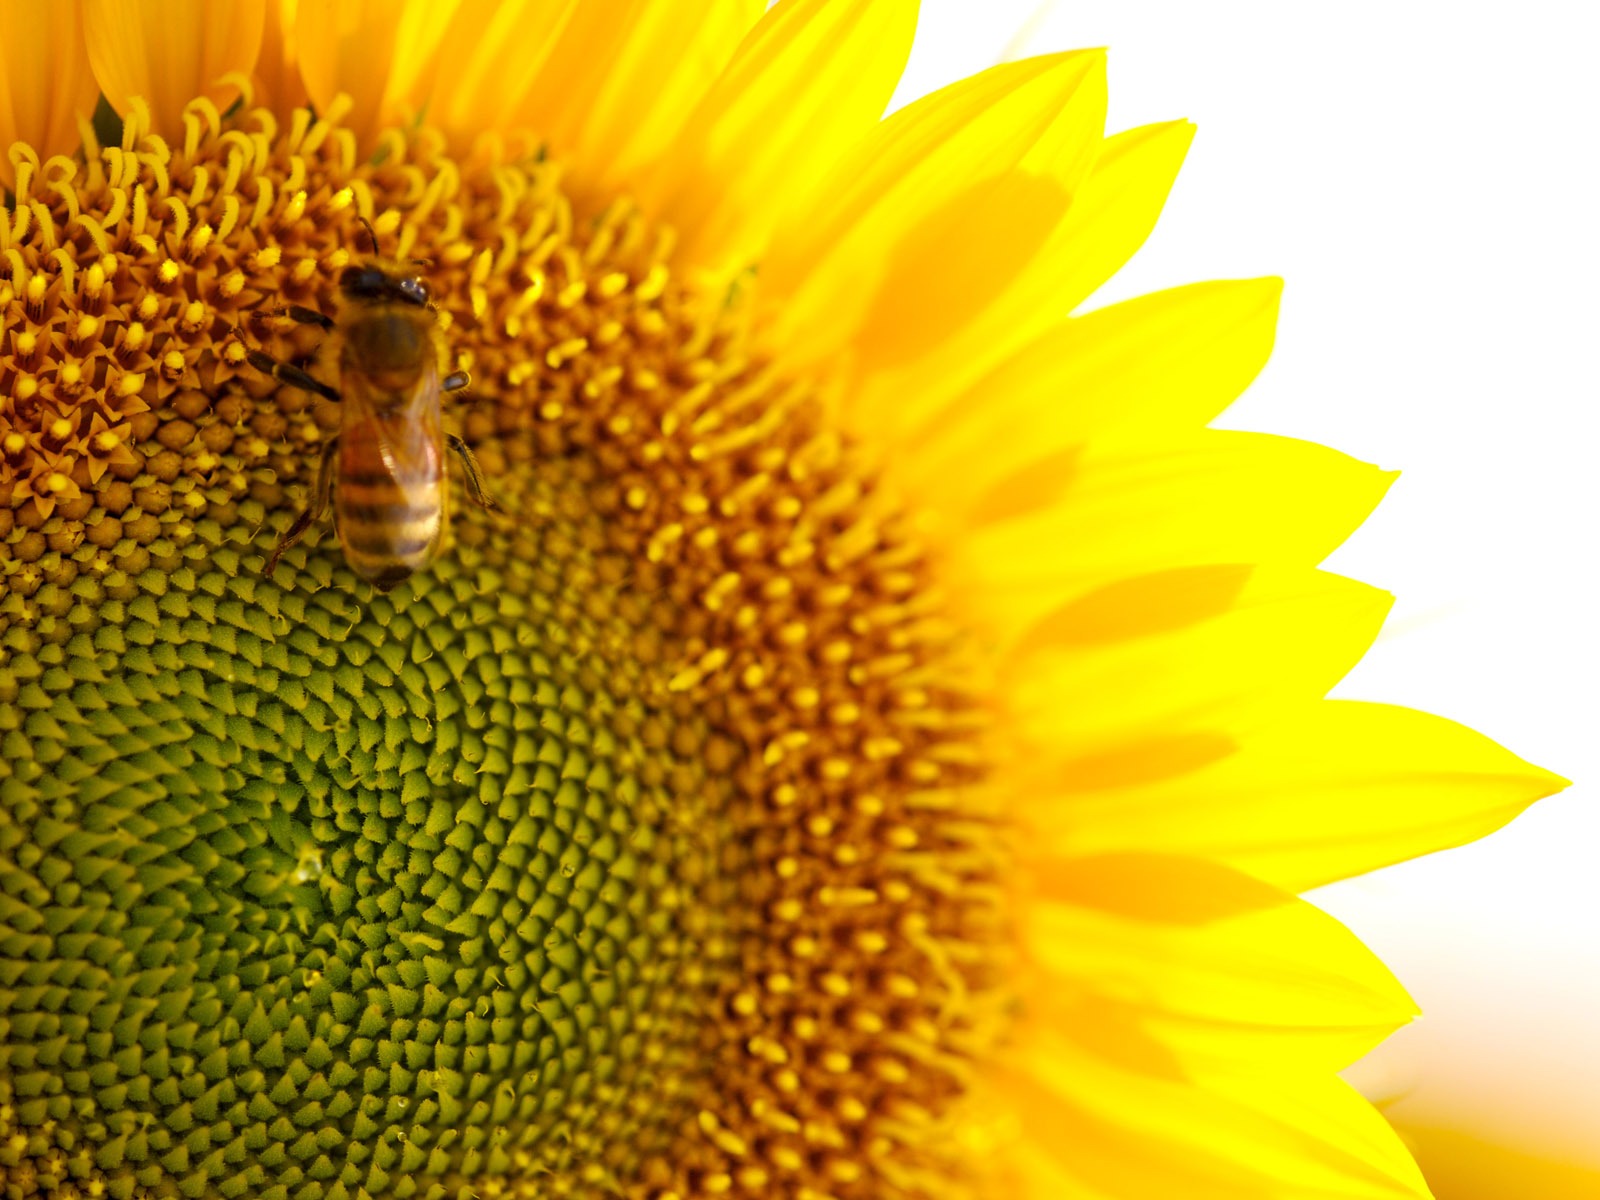 Sunny sunflower photo HD Wallpapers #33 - 1600x1200